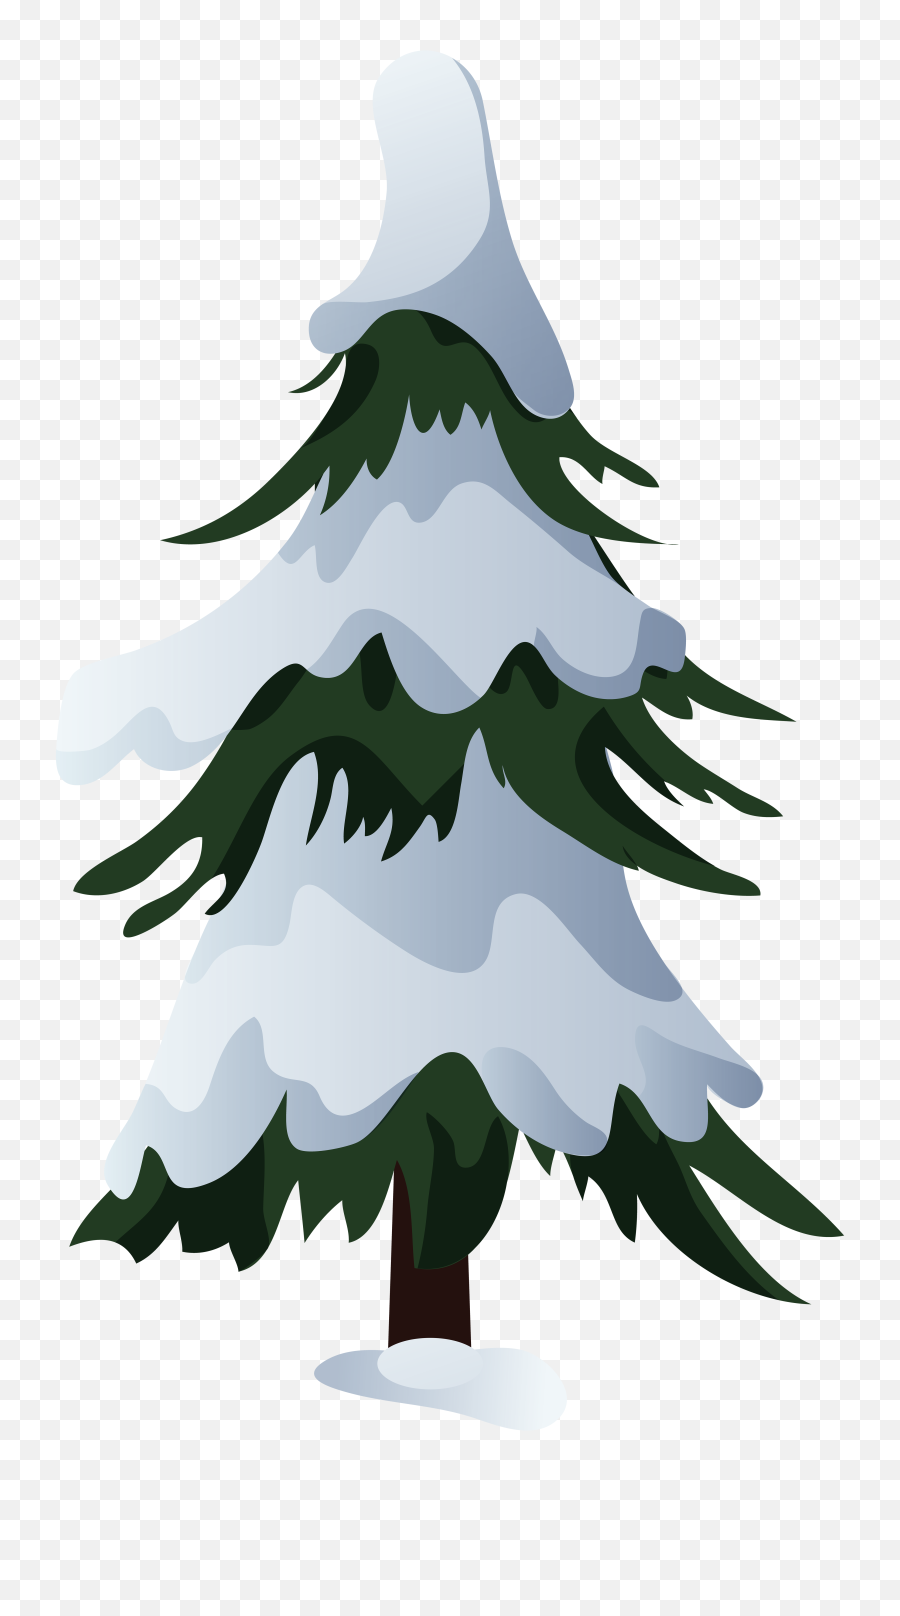 Snowy Pine Tree Clipart Free Download - Snowy Pine Tree Png,Pine Tree Transparent Background